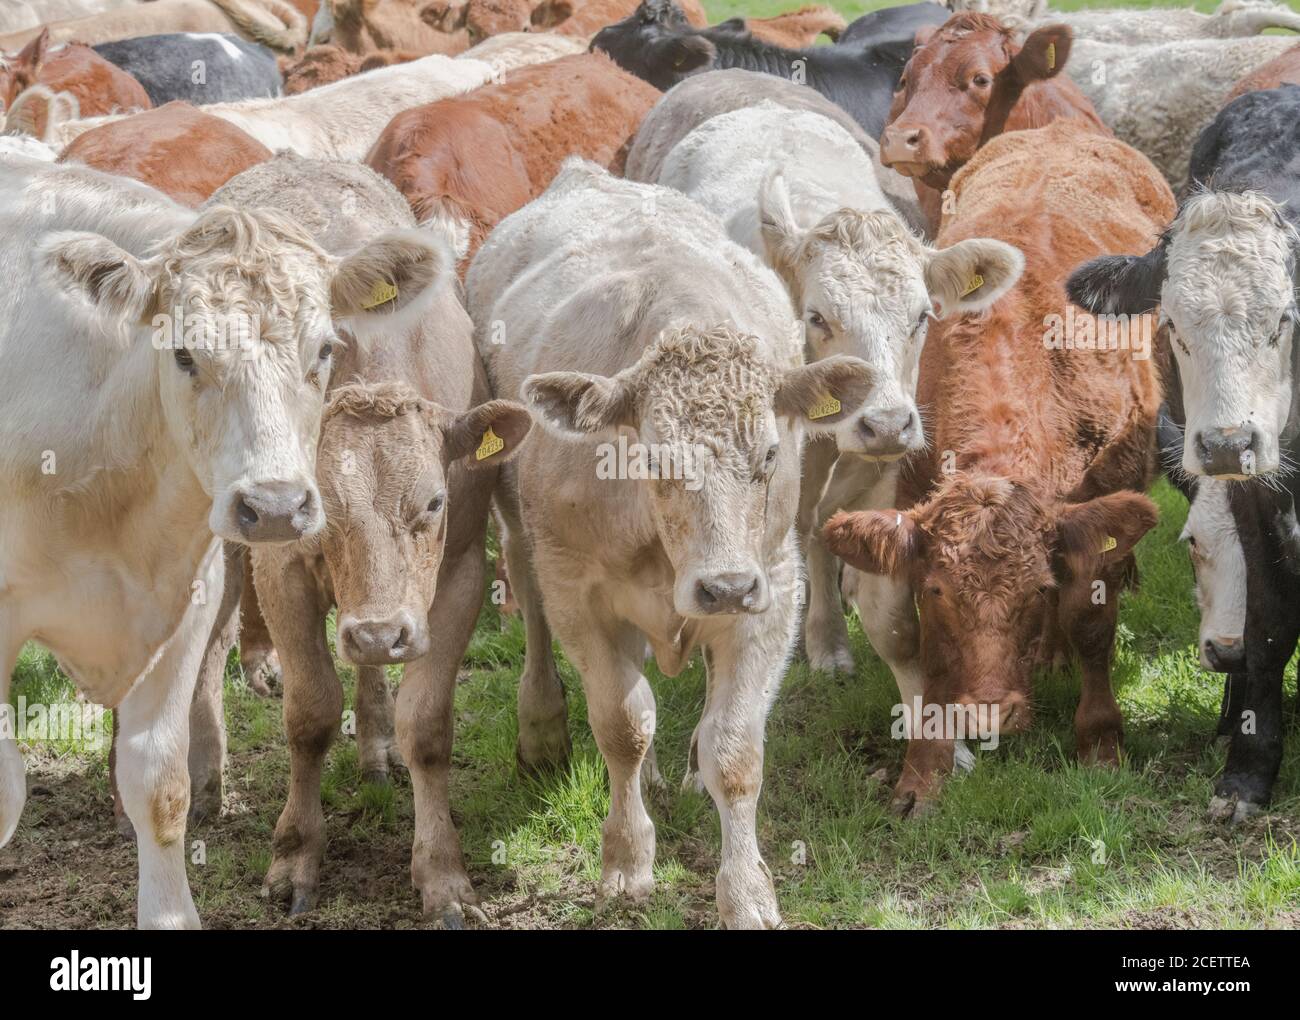 Small group of young bullocks of mixed colours, standing & looking inquisitively at camera. For UK livestock industry, British beef, UK farming. Stock Photo